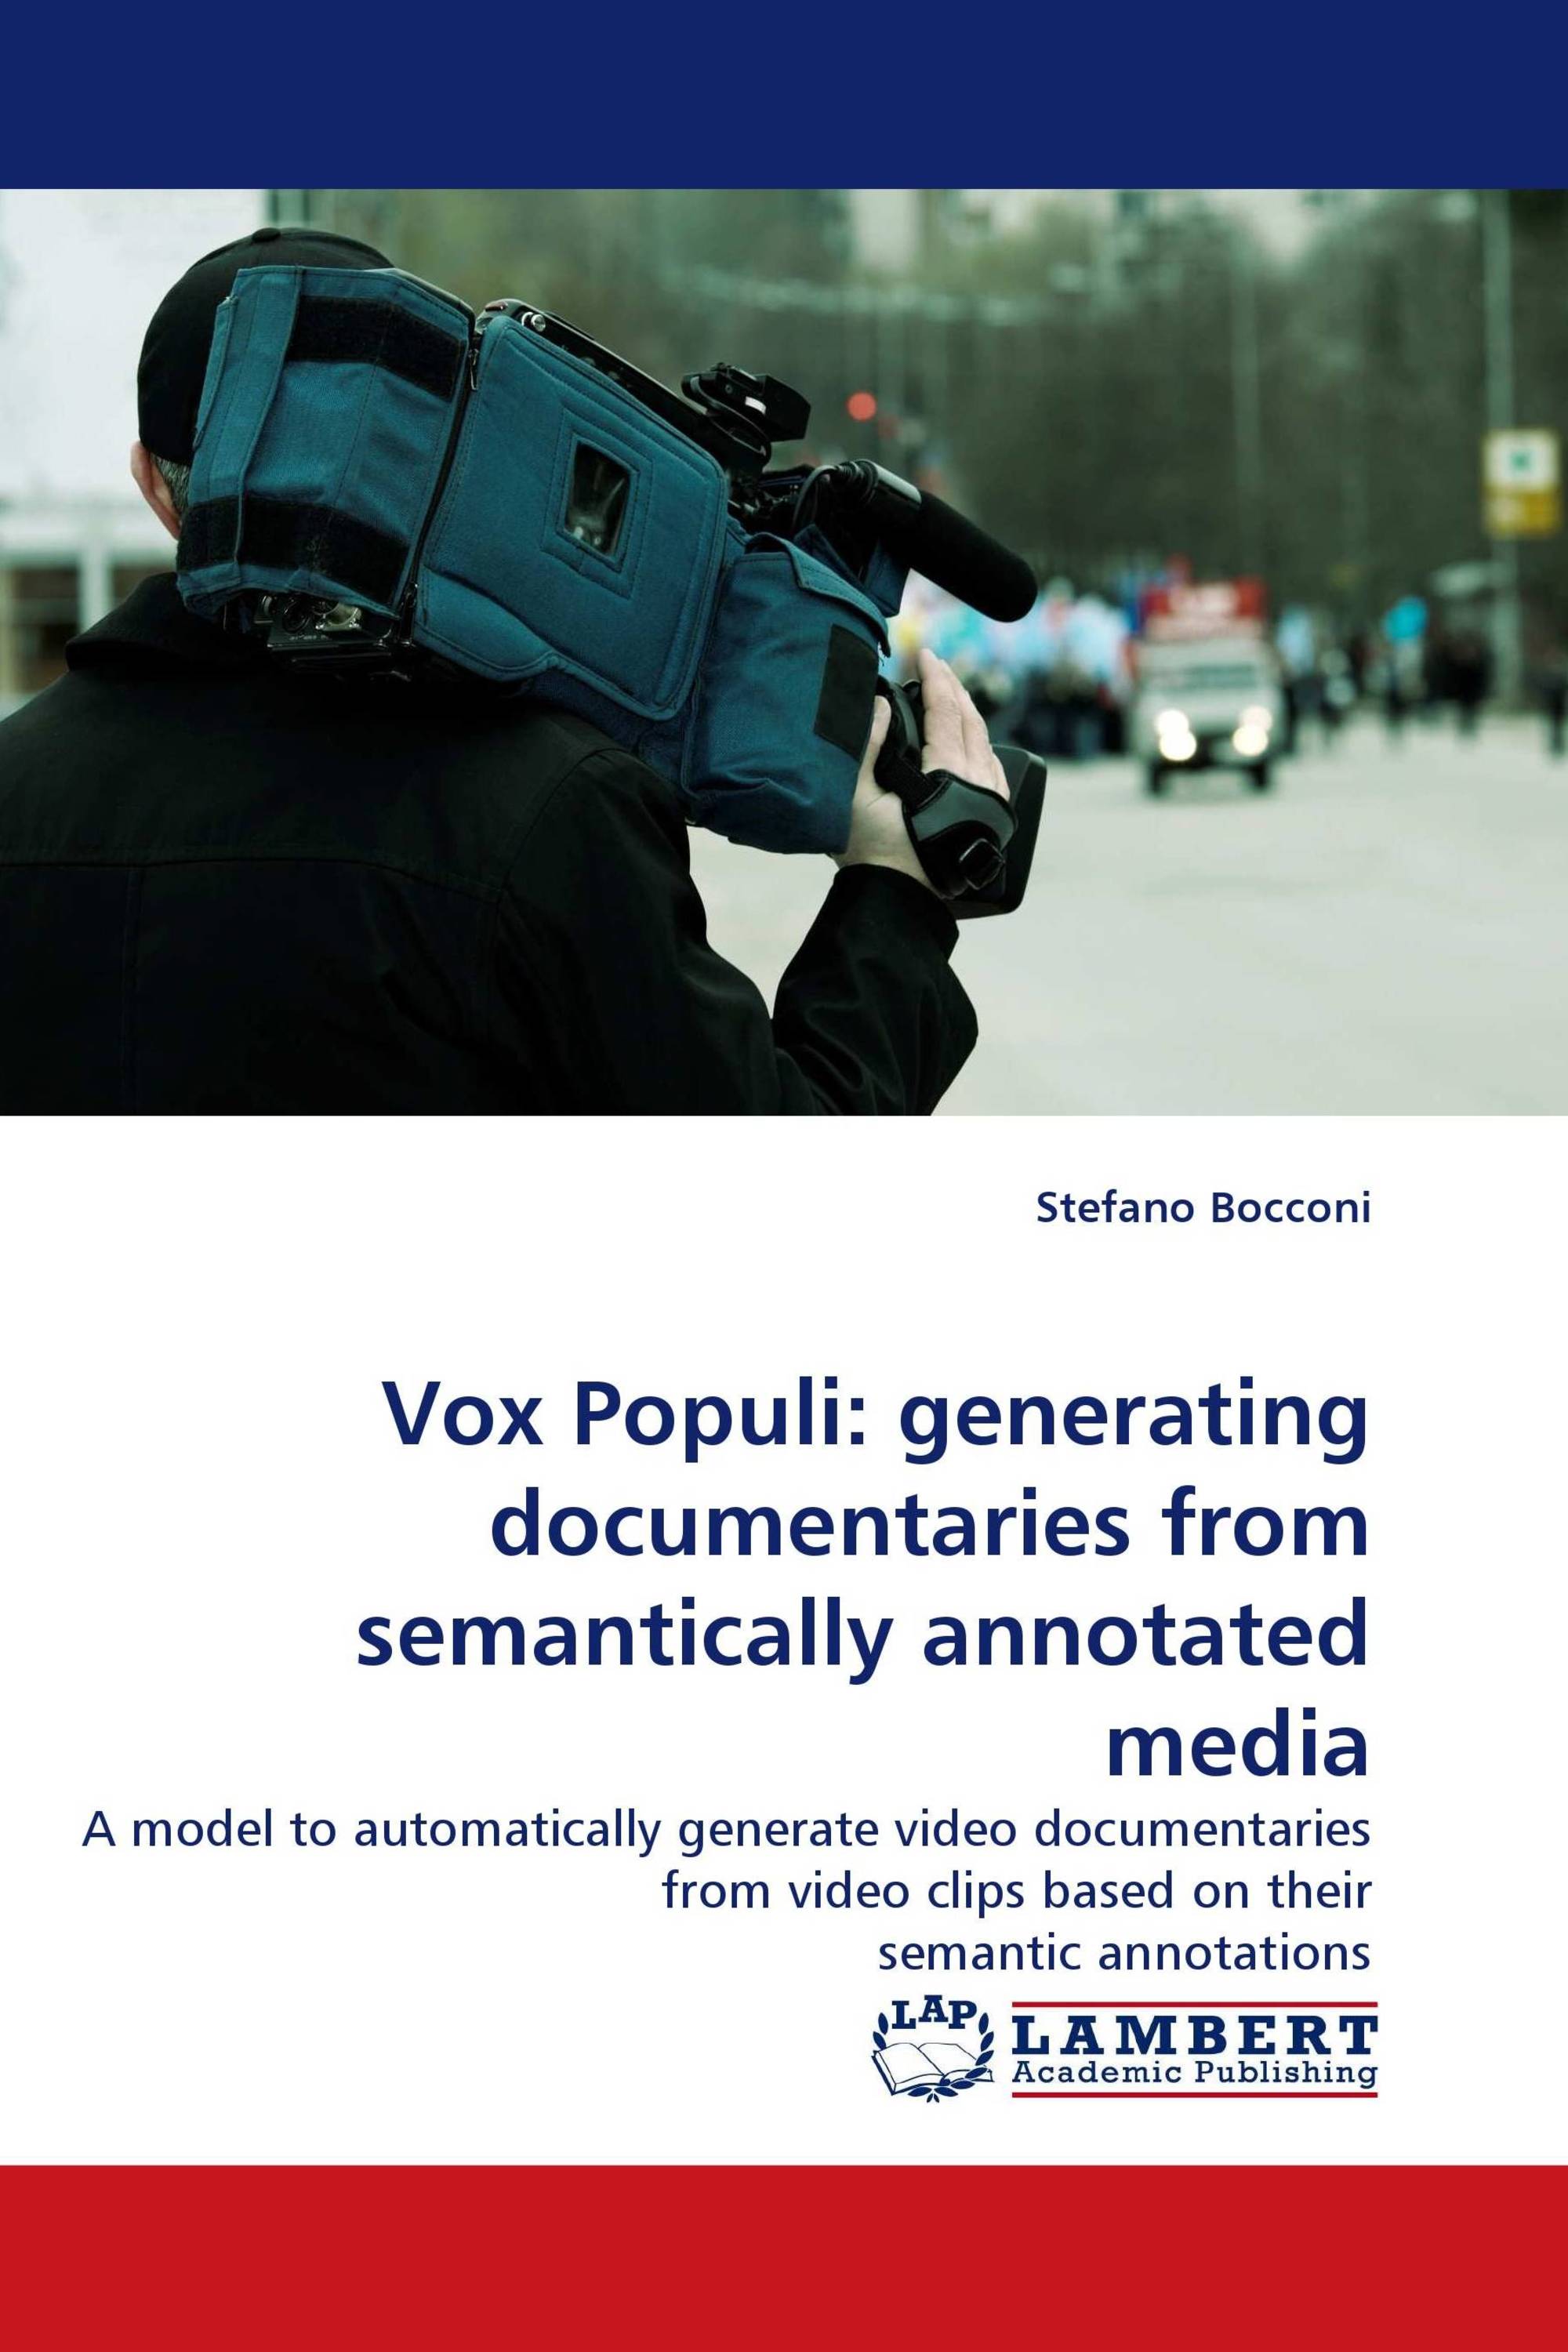 Vox Populi: generating documentaries from semantically annotated media